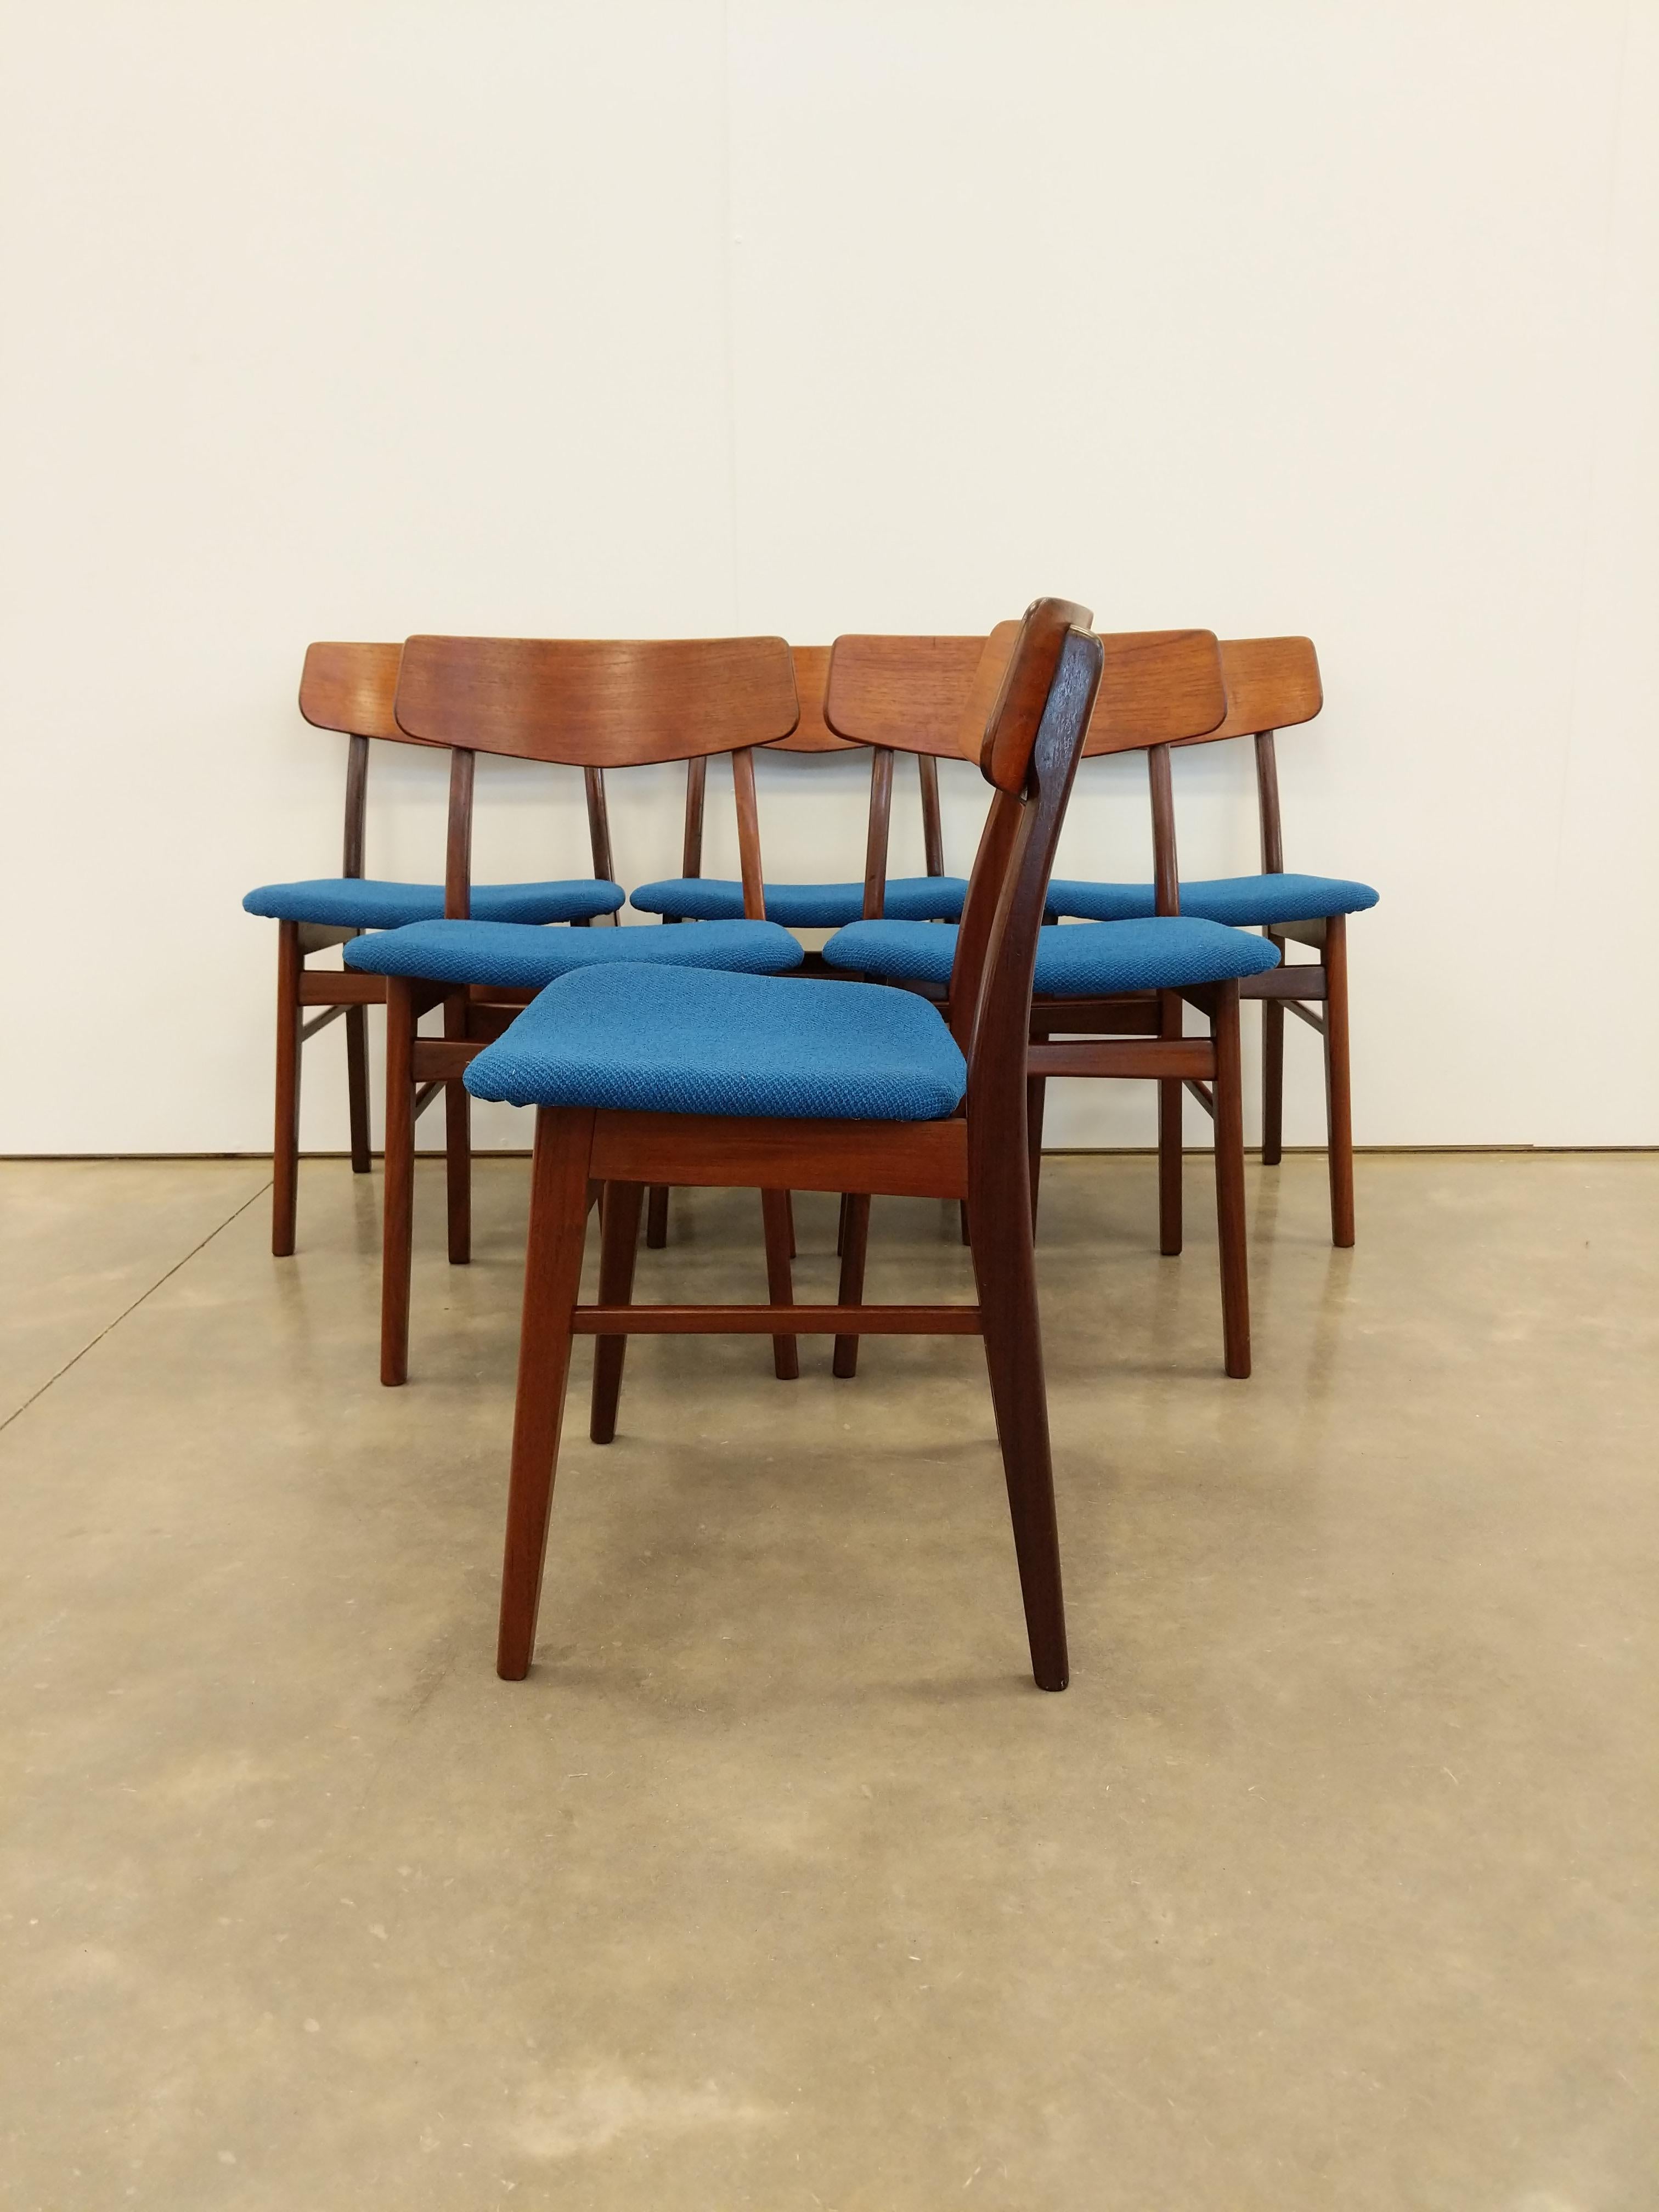 Set of 6 Vintage Danish Mid Century Modern Dining Chairs In Good Condition For Sale In Gardiner, NY